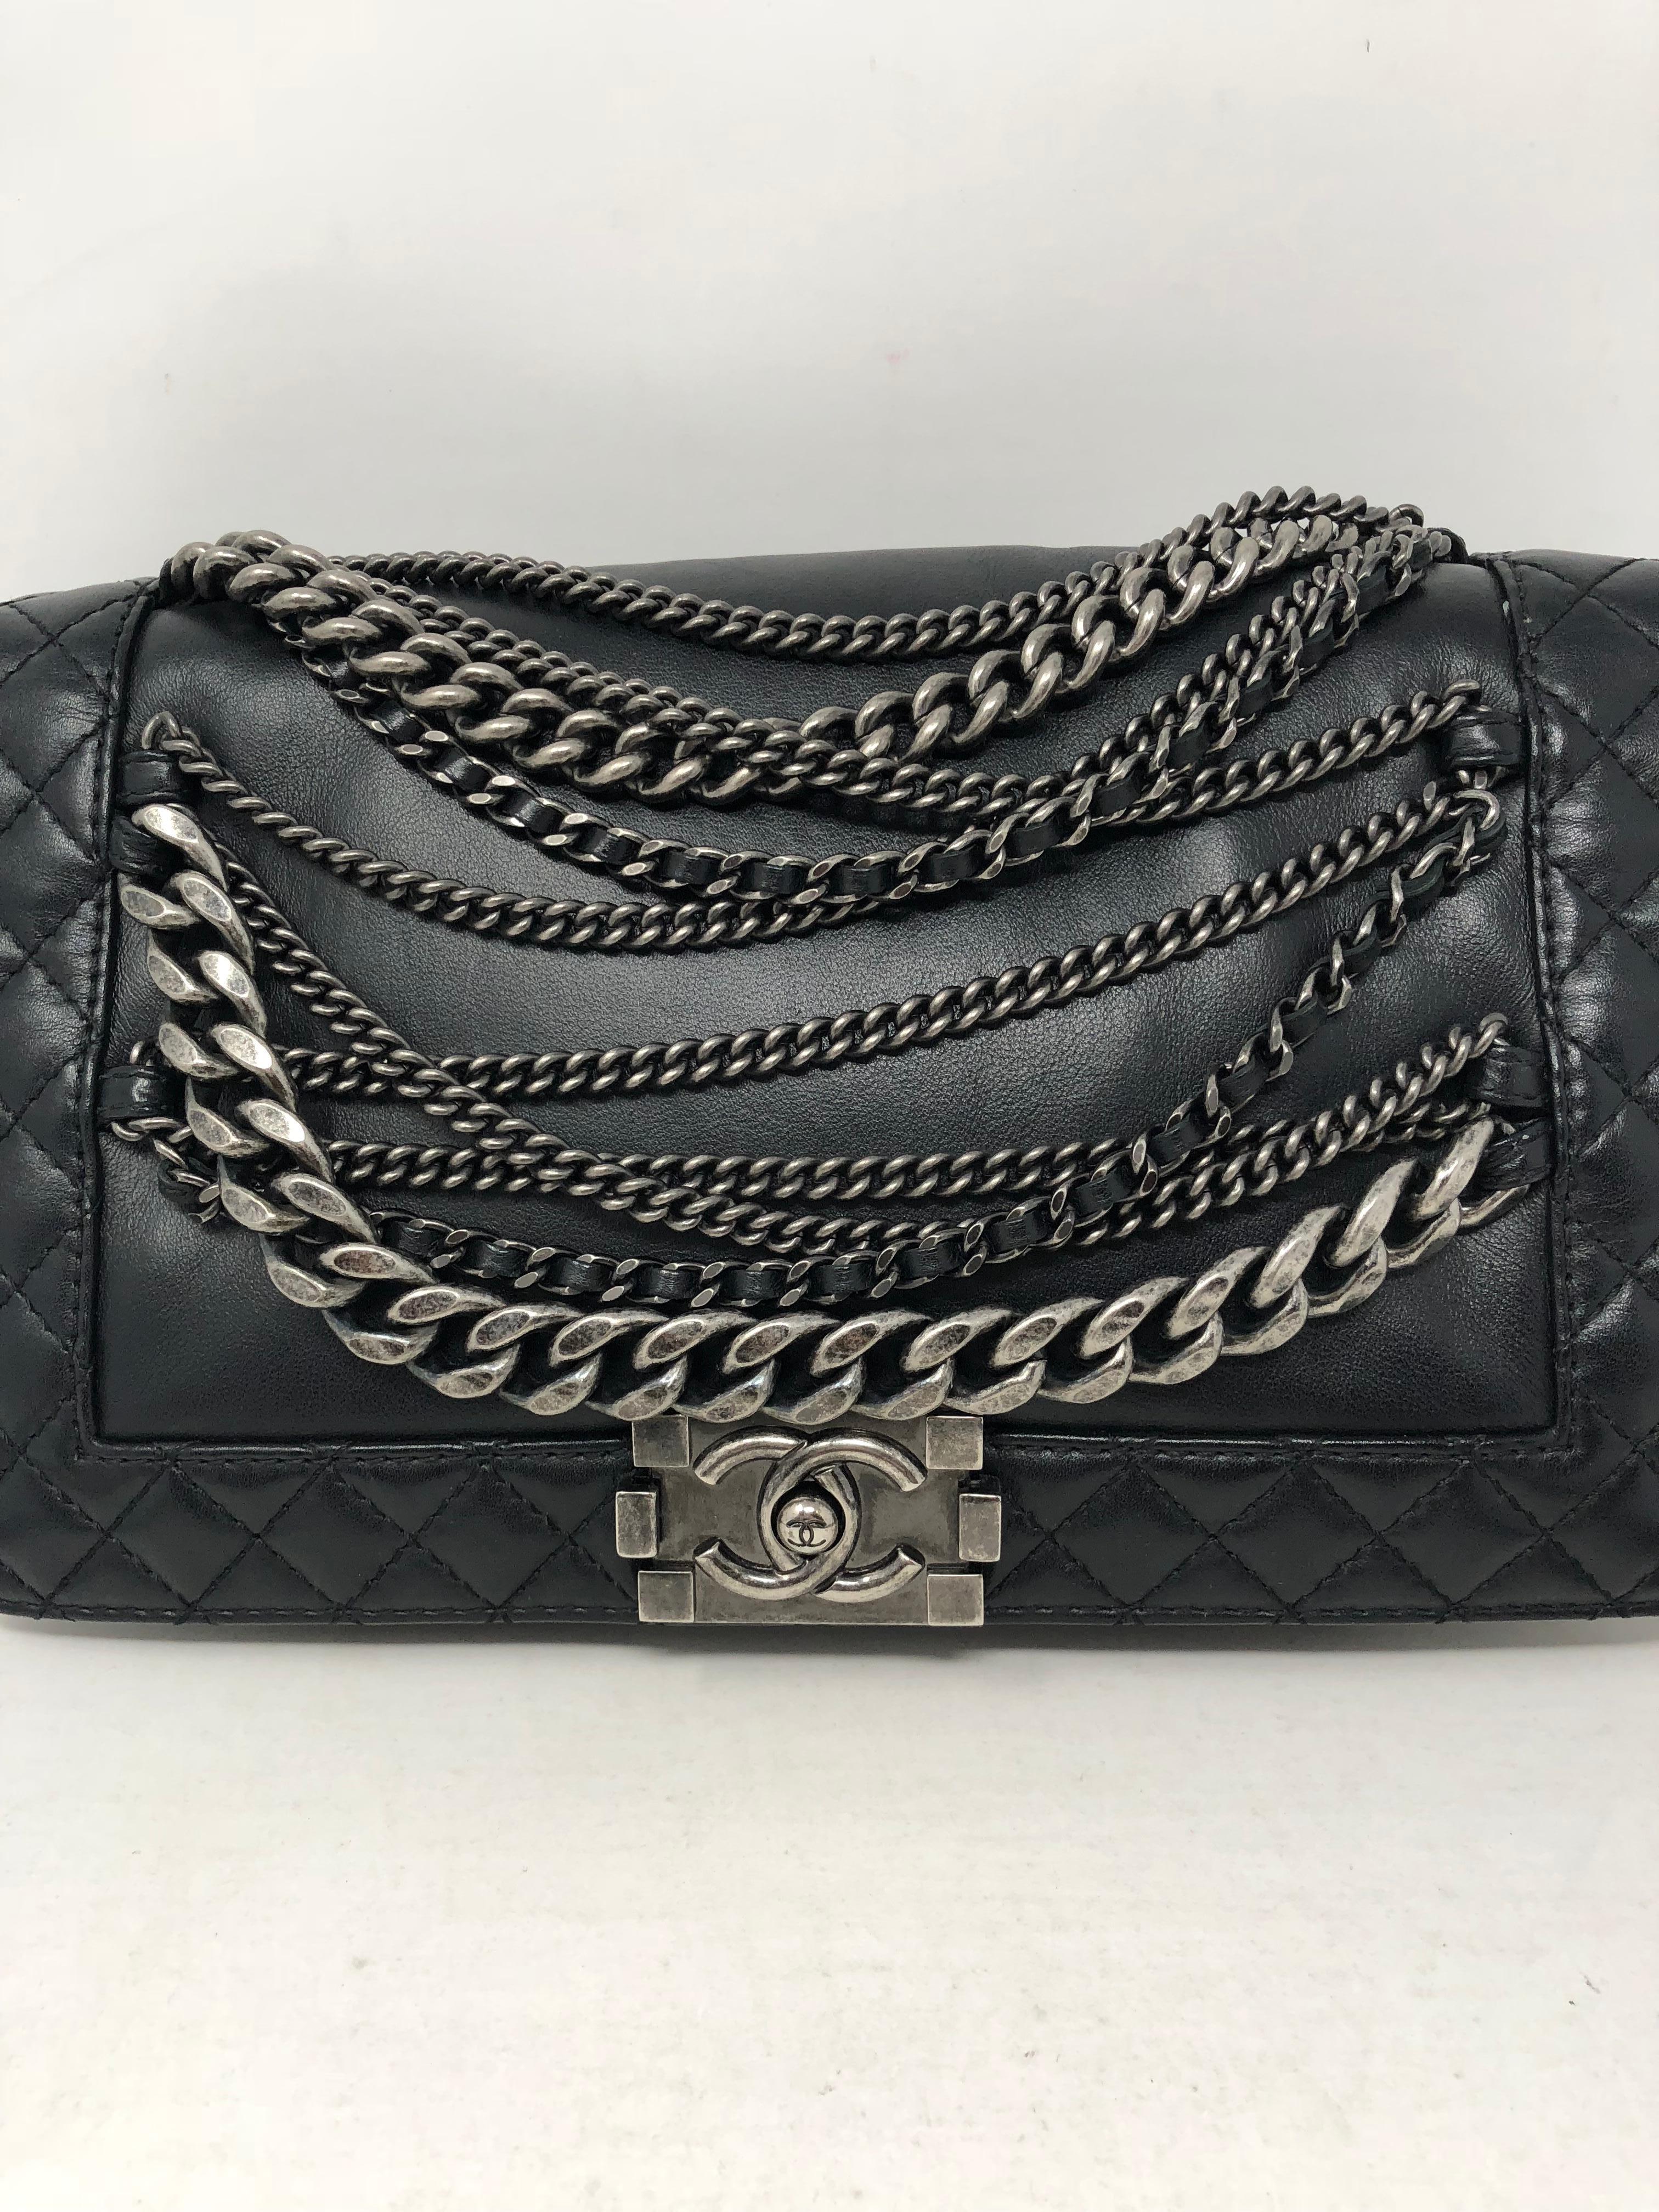 Chanel Black Chains Around Boy Bag with antique silver hardware and chains. Rare and hard to find. A great addition to your Chanel collection. Can be worn two ways. Comes with authenticity card and matching serial number inside bag. Good condition.